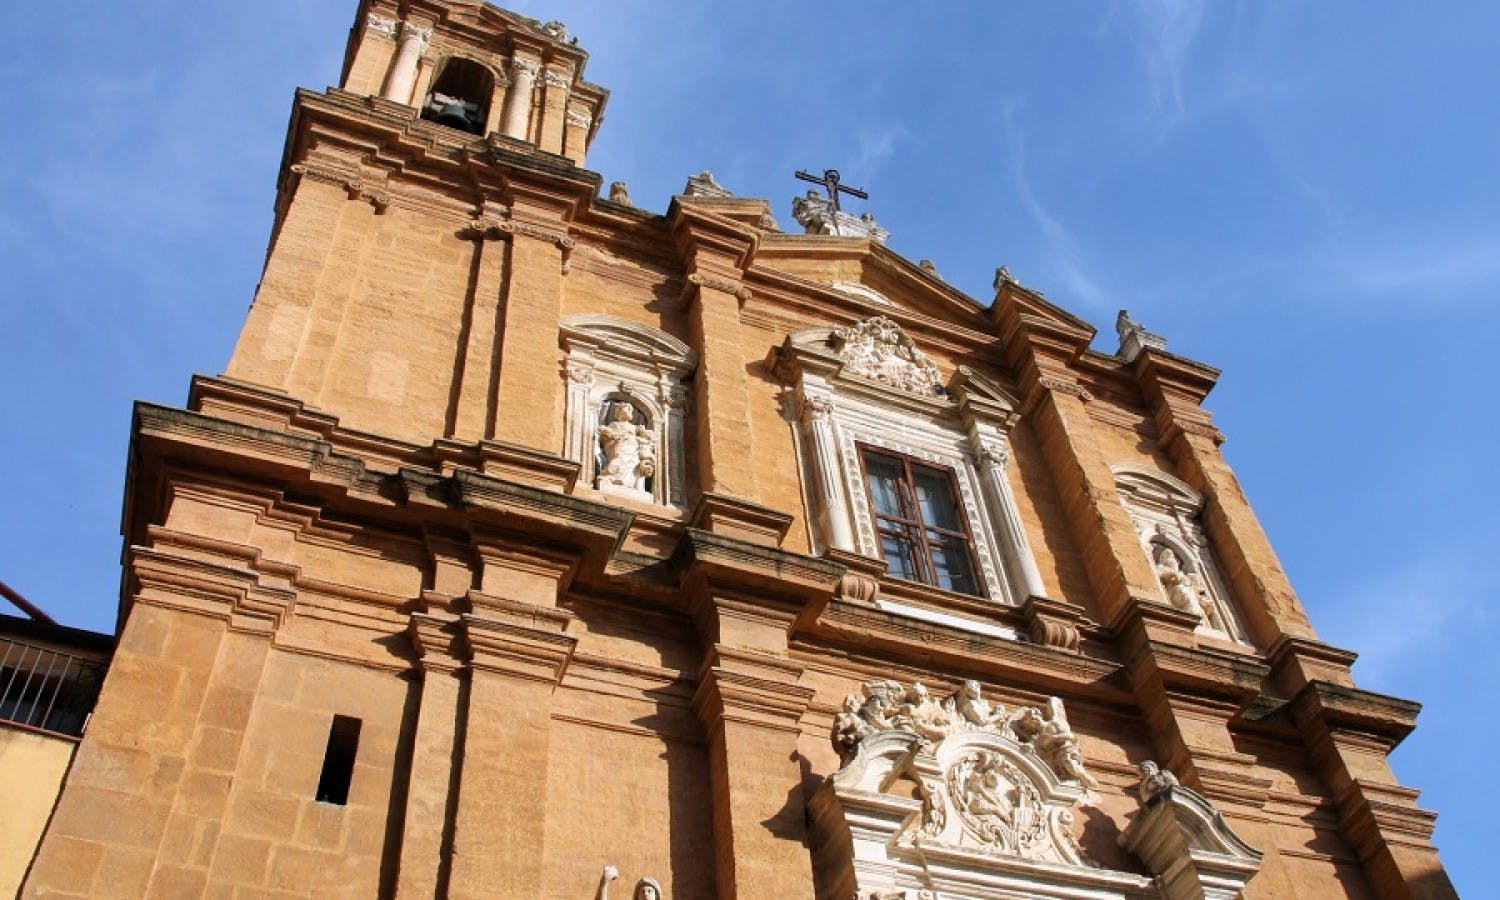 Guided tour of Agrigento with entrance to the Santo Spirito Monastery and the Cathedral bell tower